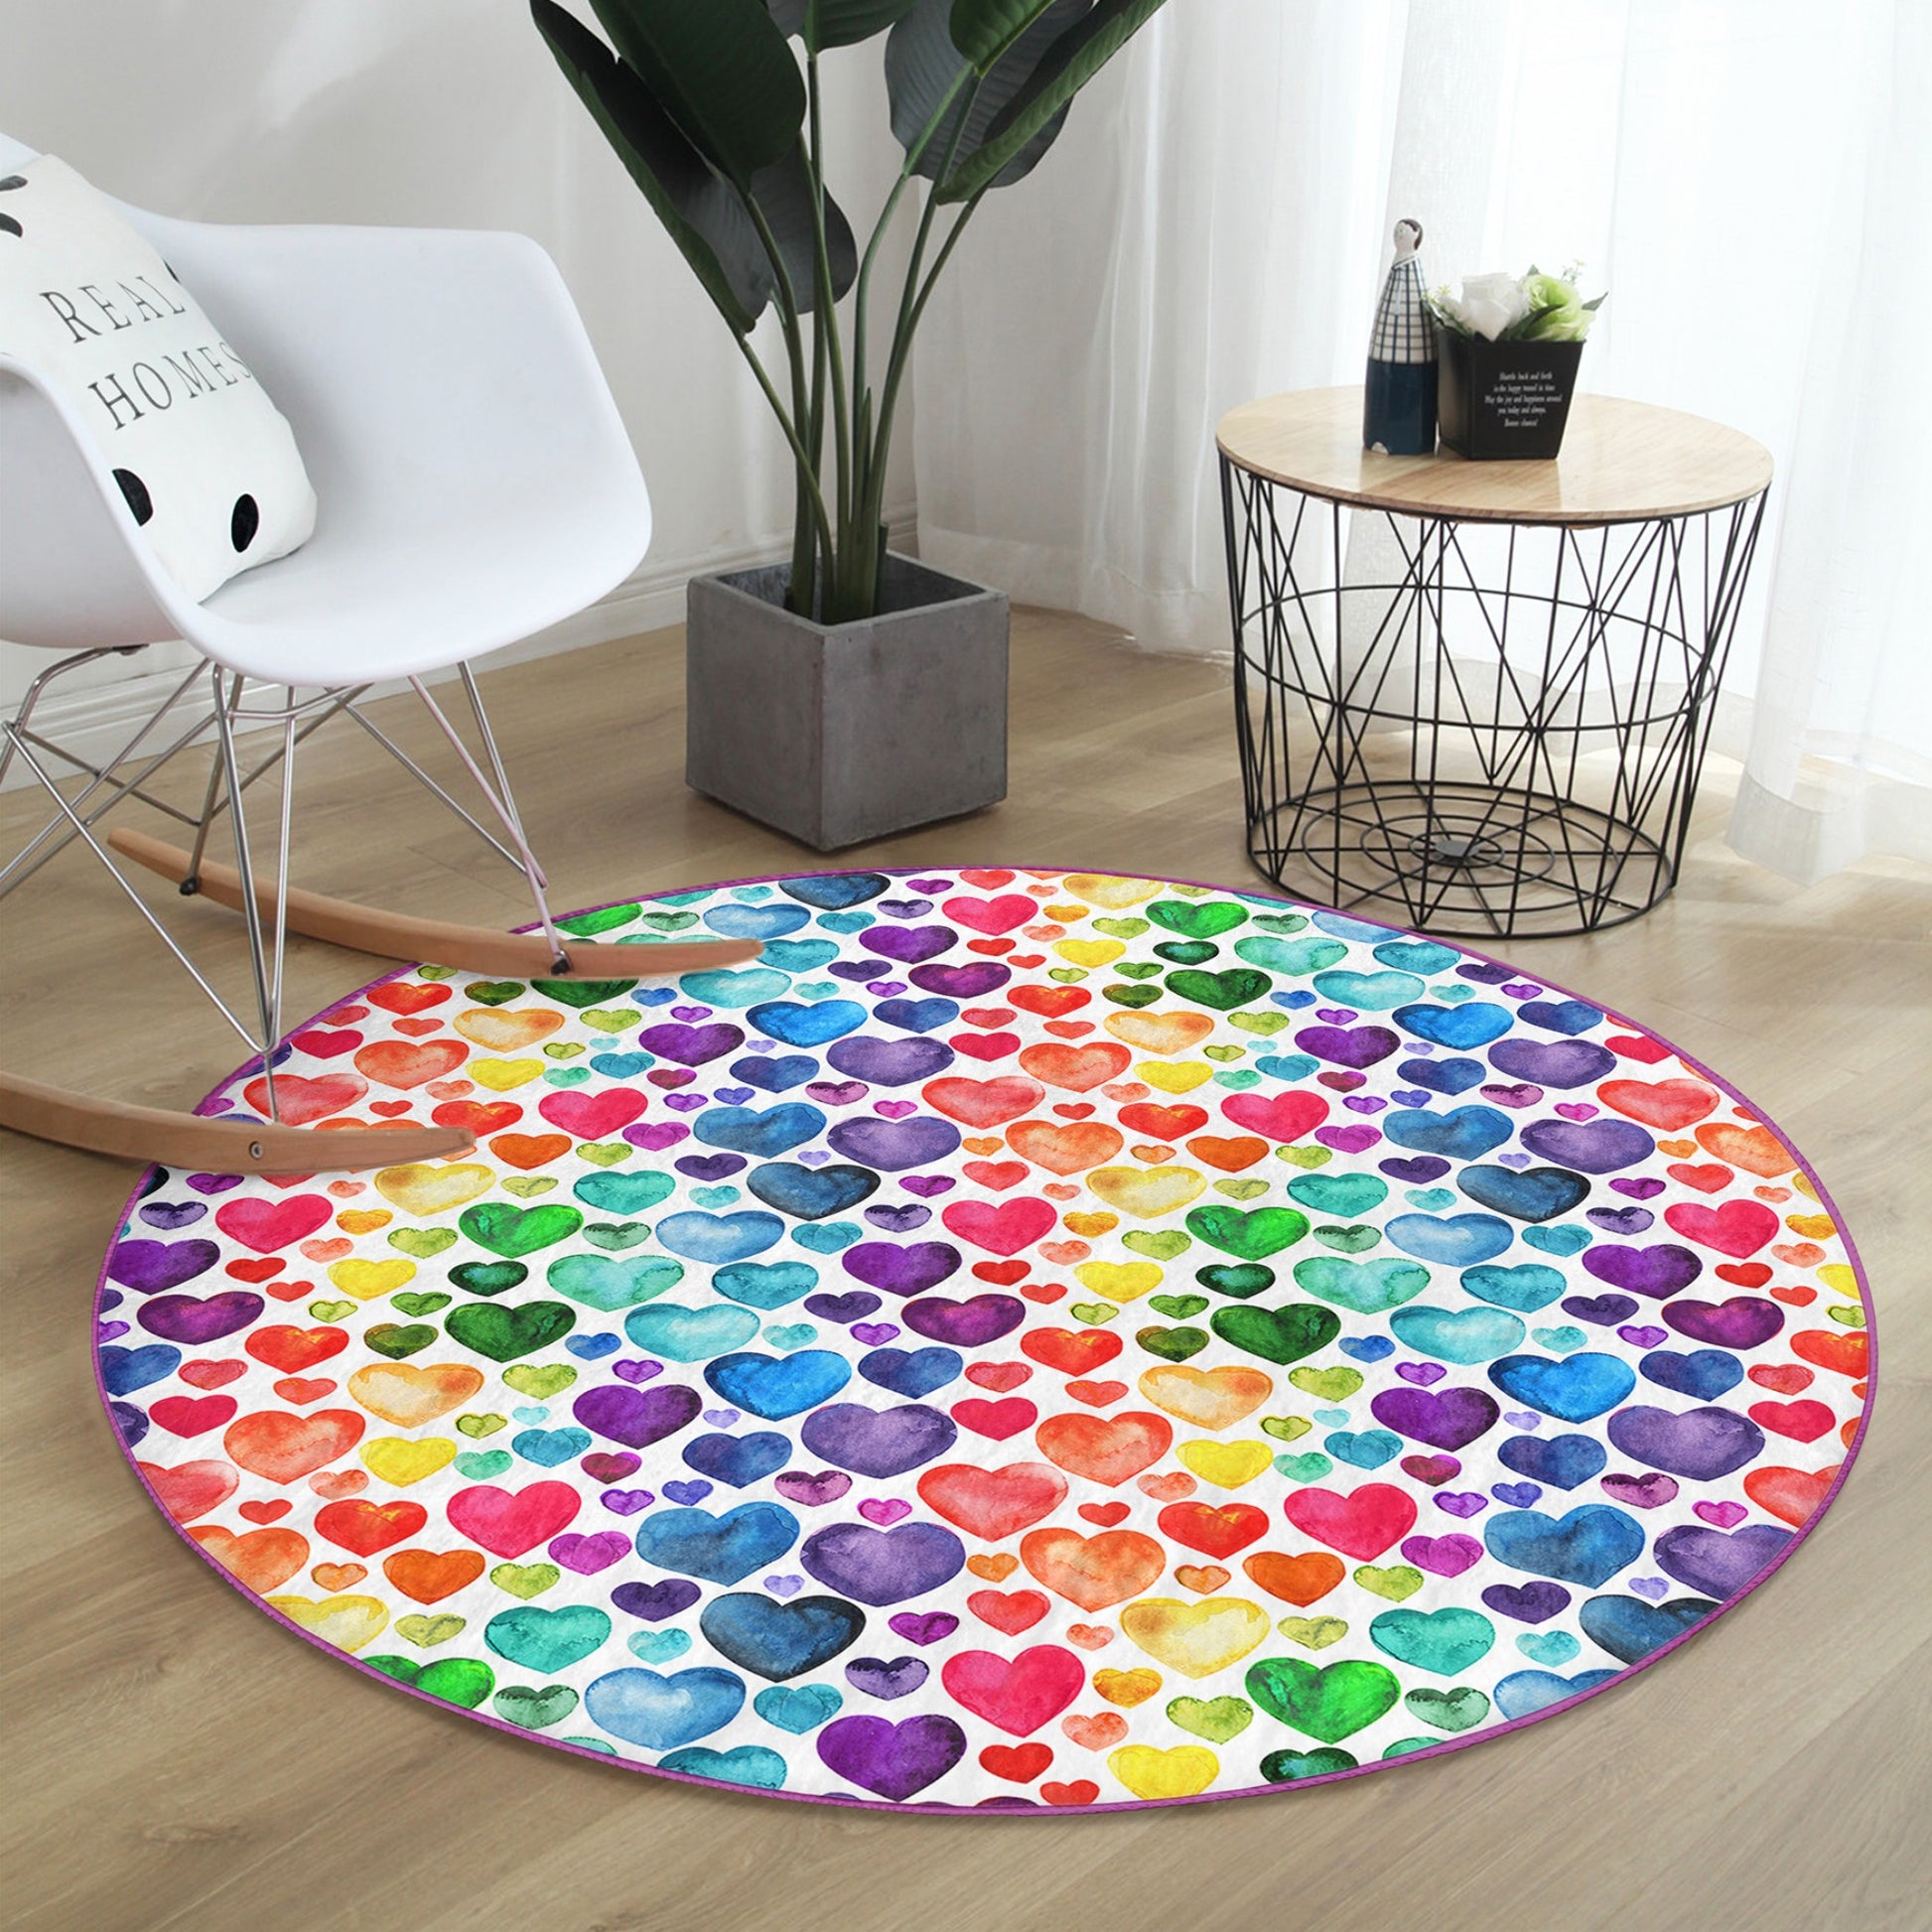 Washable Rug with Heart Pattern - Easy Maintenance